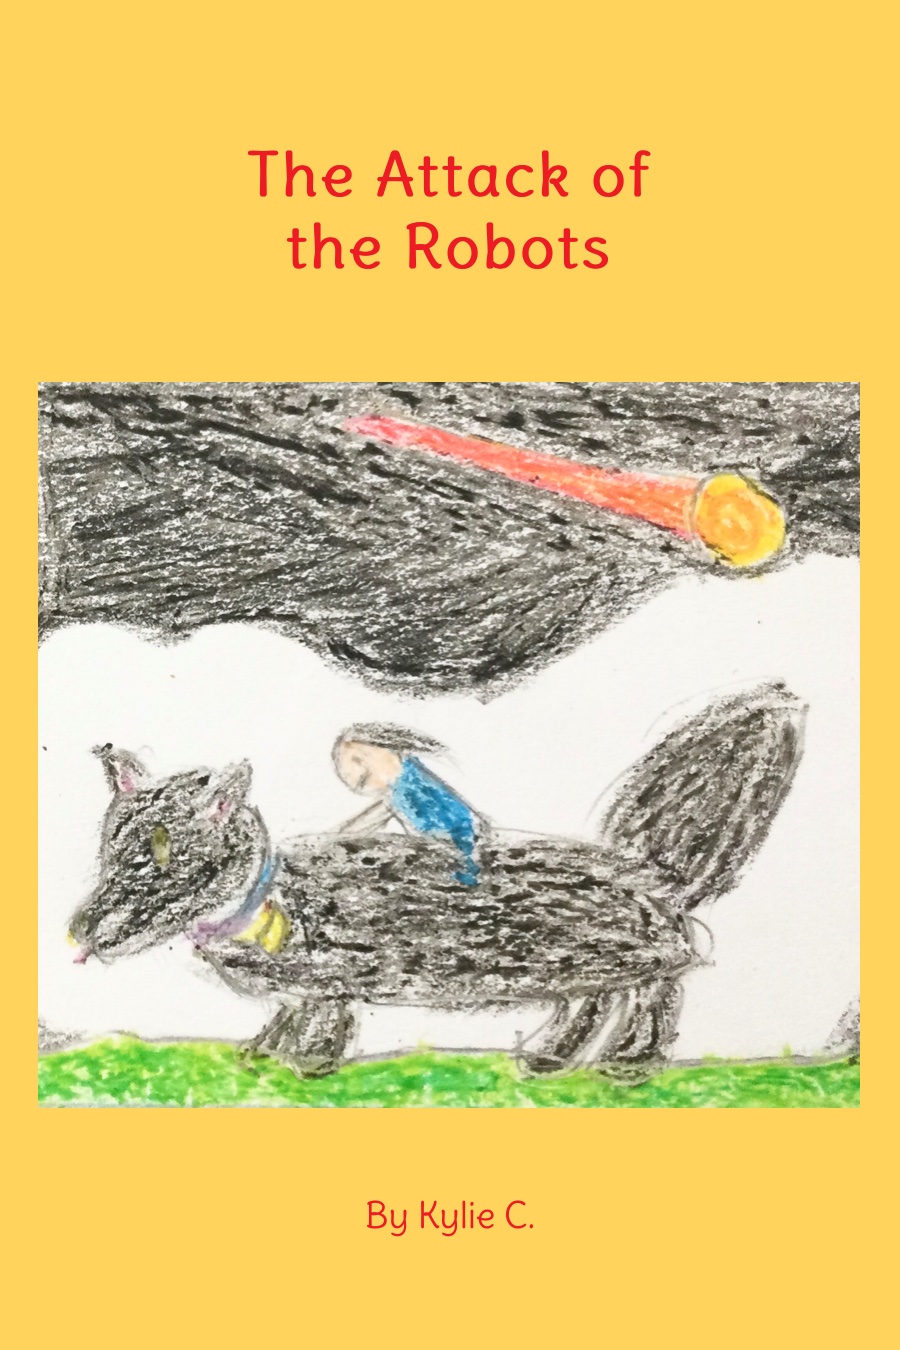 The Attack of the Robots by Kylie C